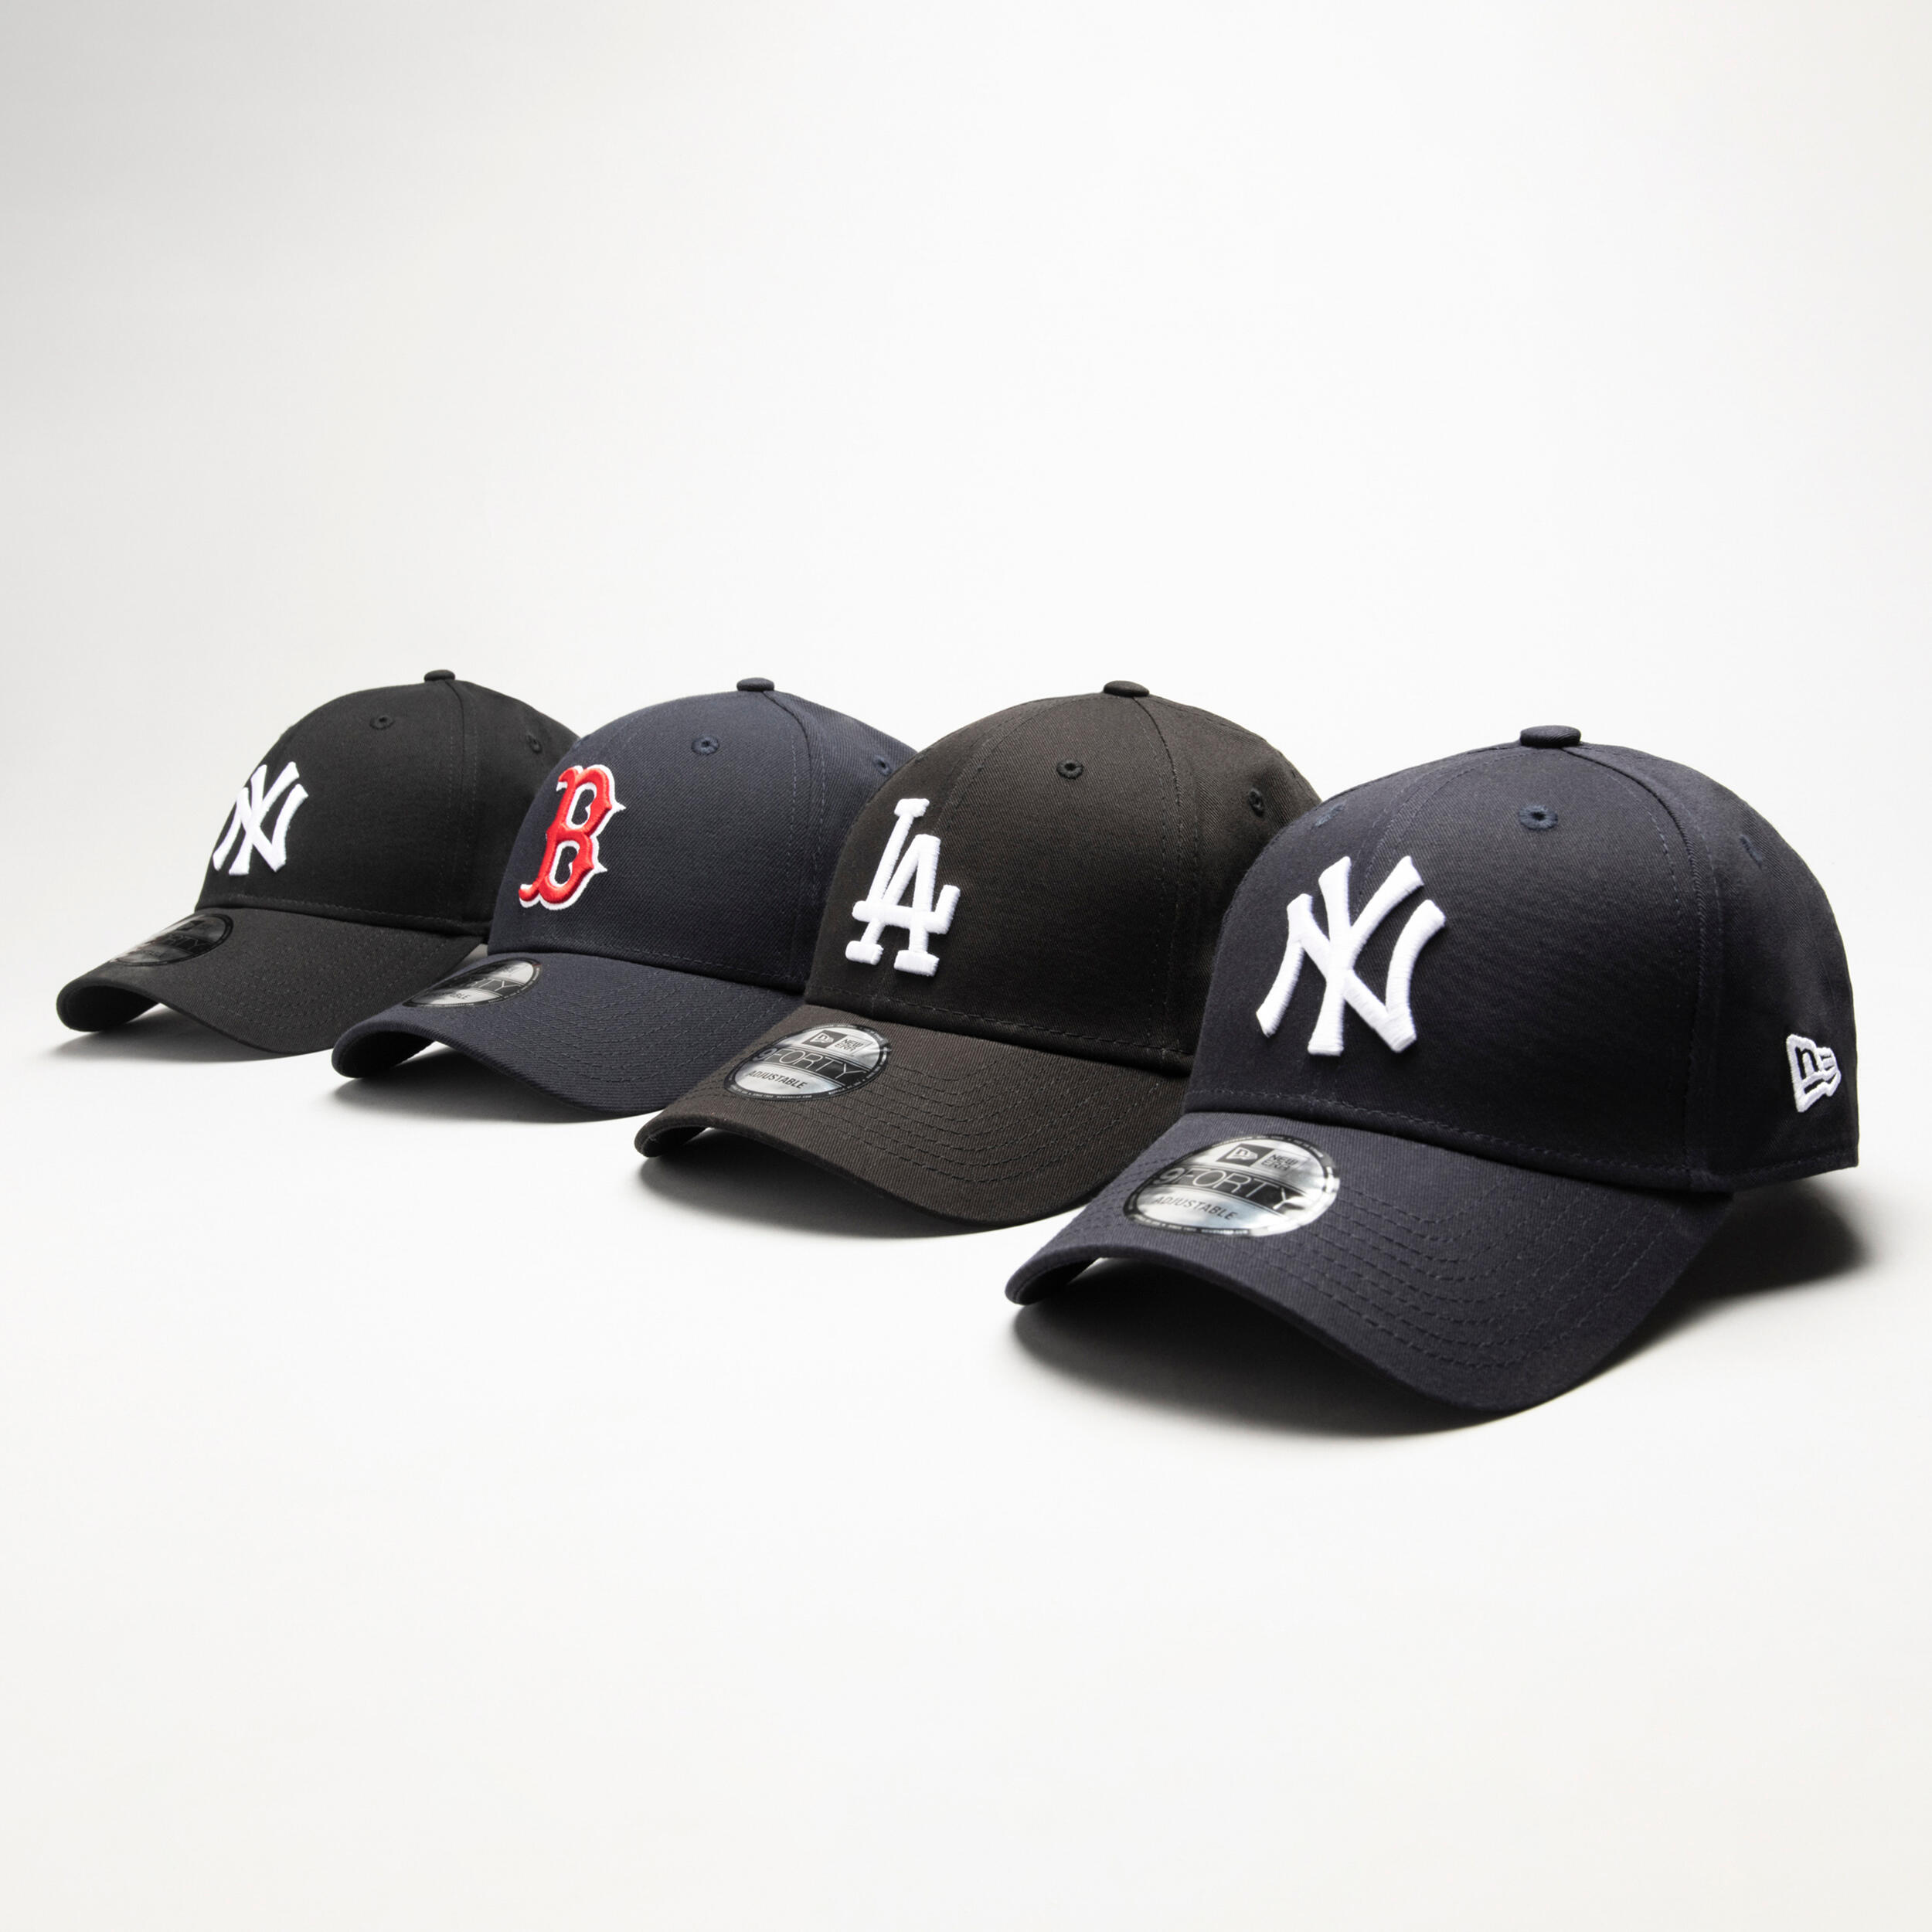 MLB New Era Fear of God Essentials 59FIFTY Fitted Hat  Navy